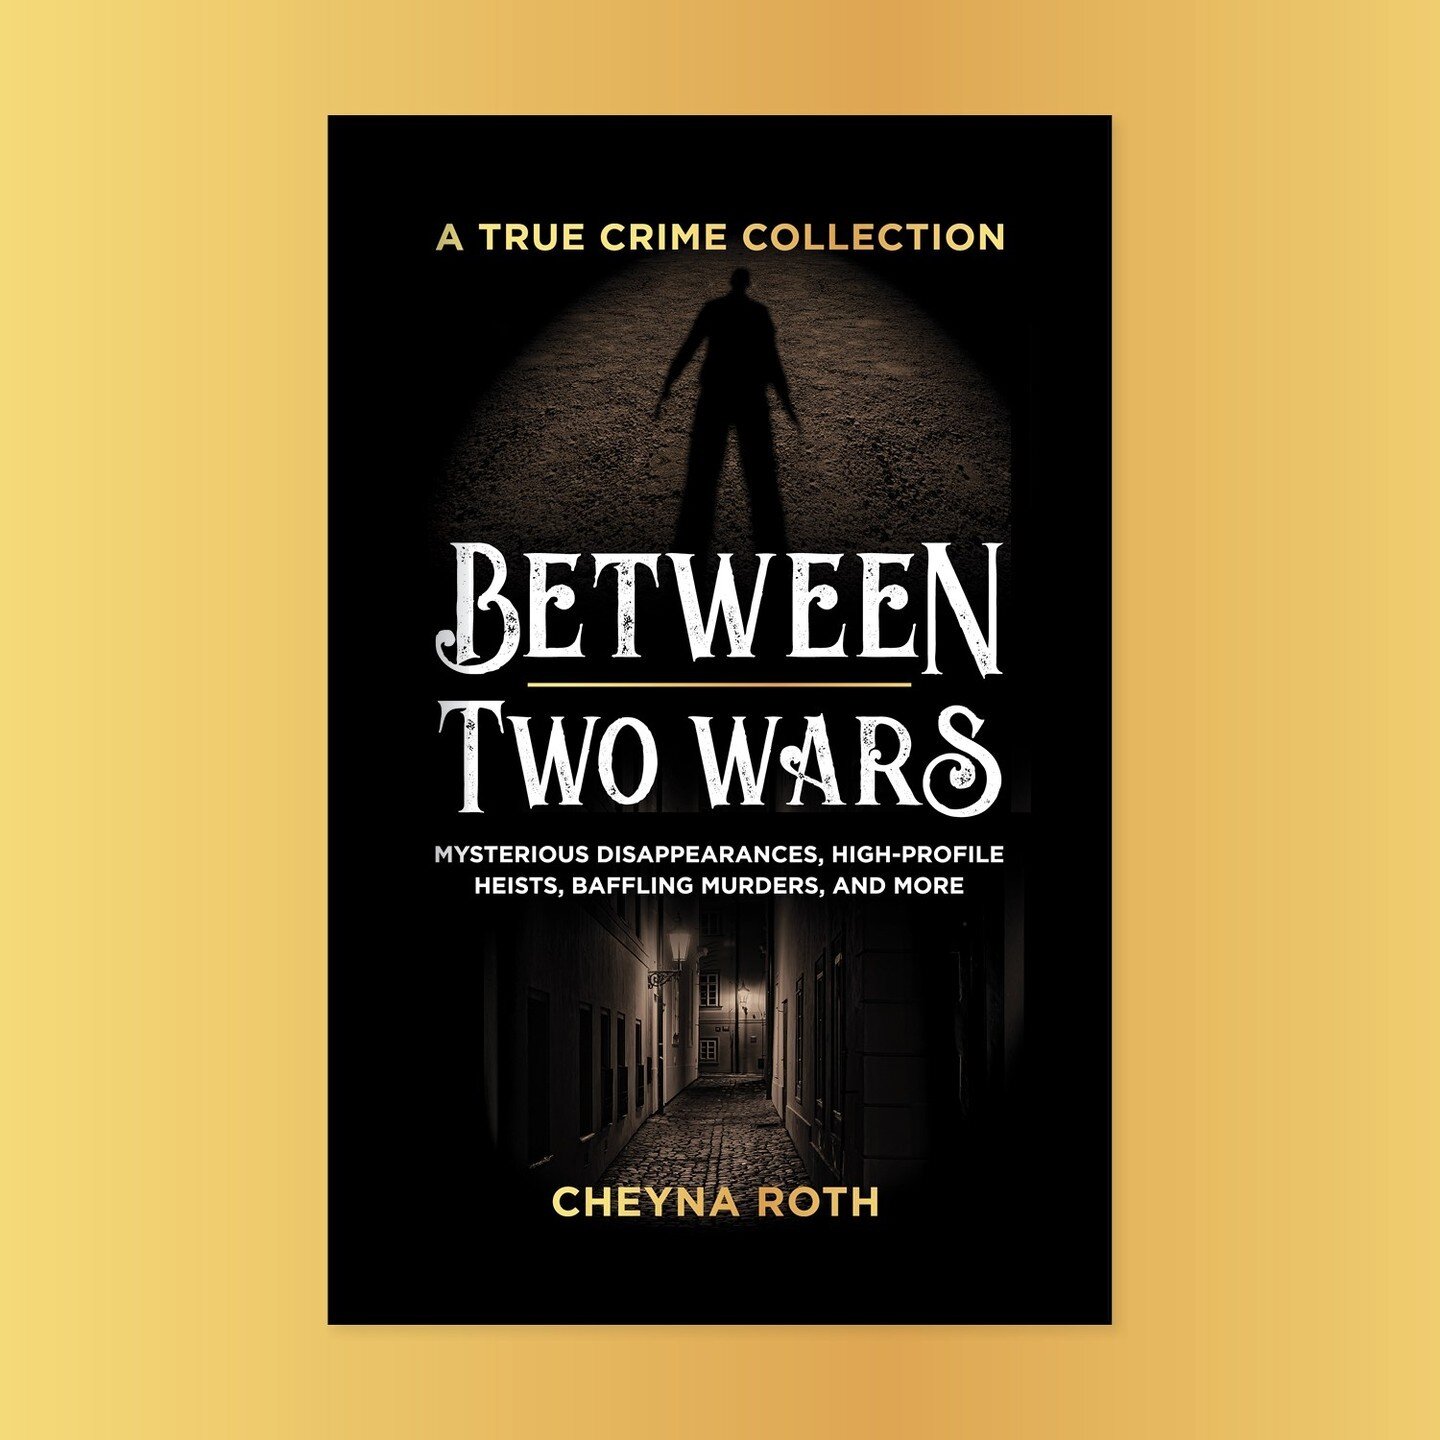 Fun new cover for a book coming soon! Thank you Ulysses Press.
Discover the most fascinating crimes committed between two of the greatest wars ever fought, from America&rsquo;s first train robbery by the Reno brothers in 1866, to alleged killings at 